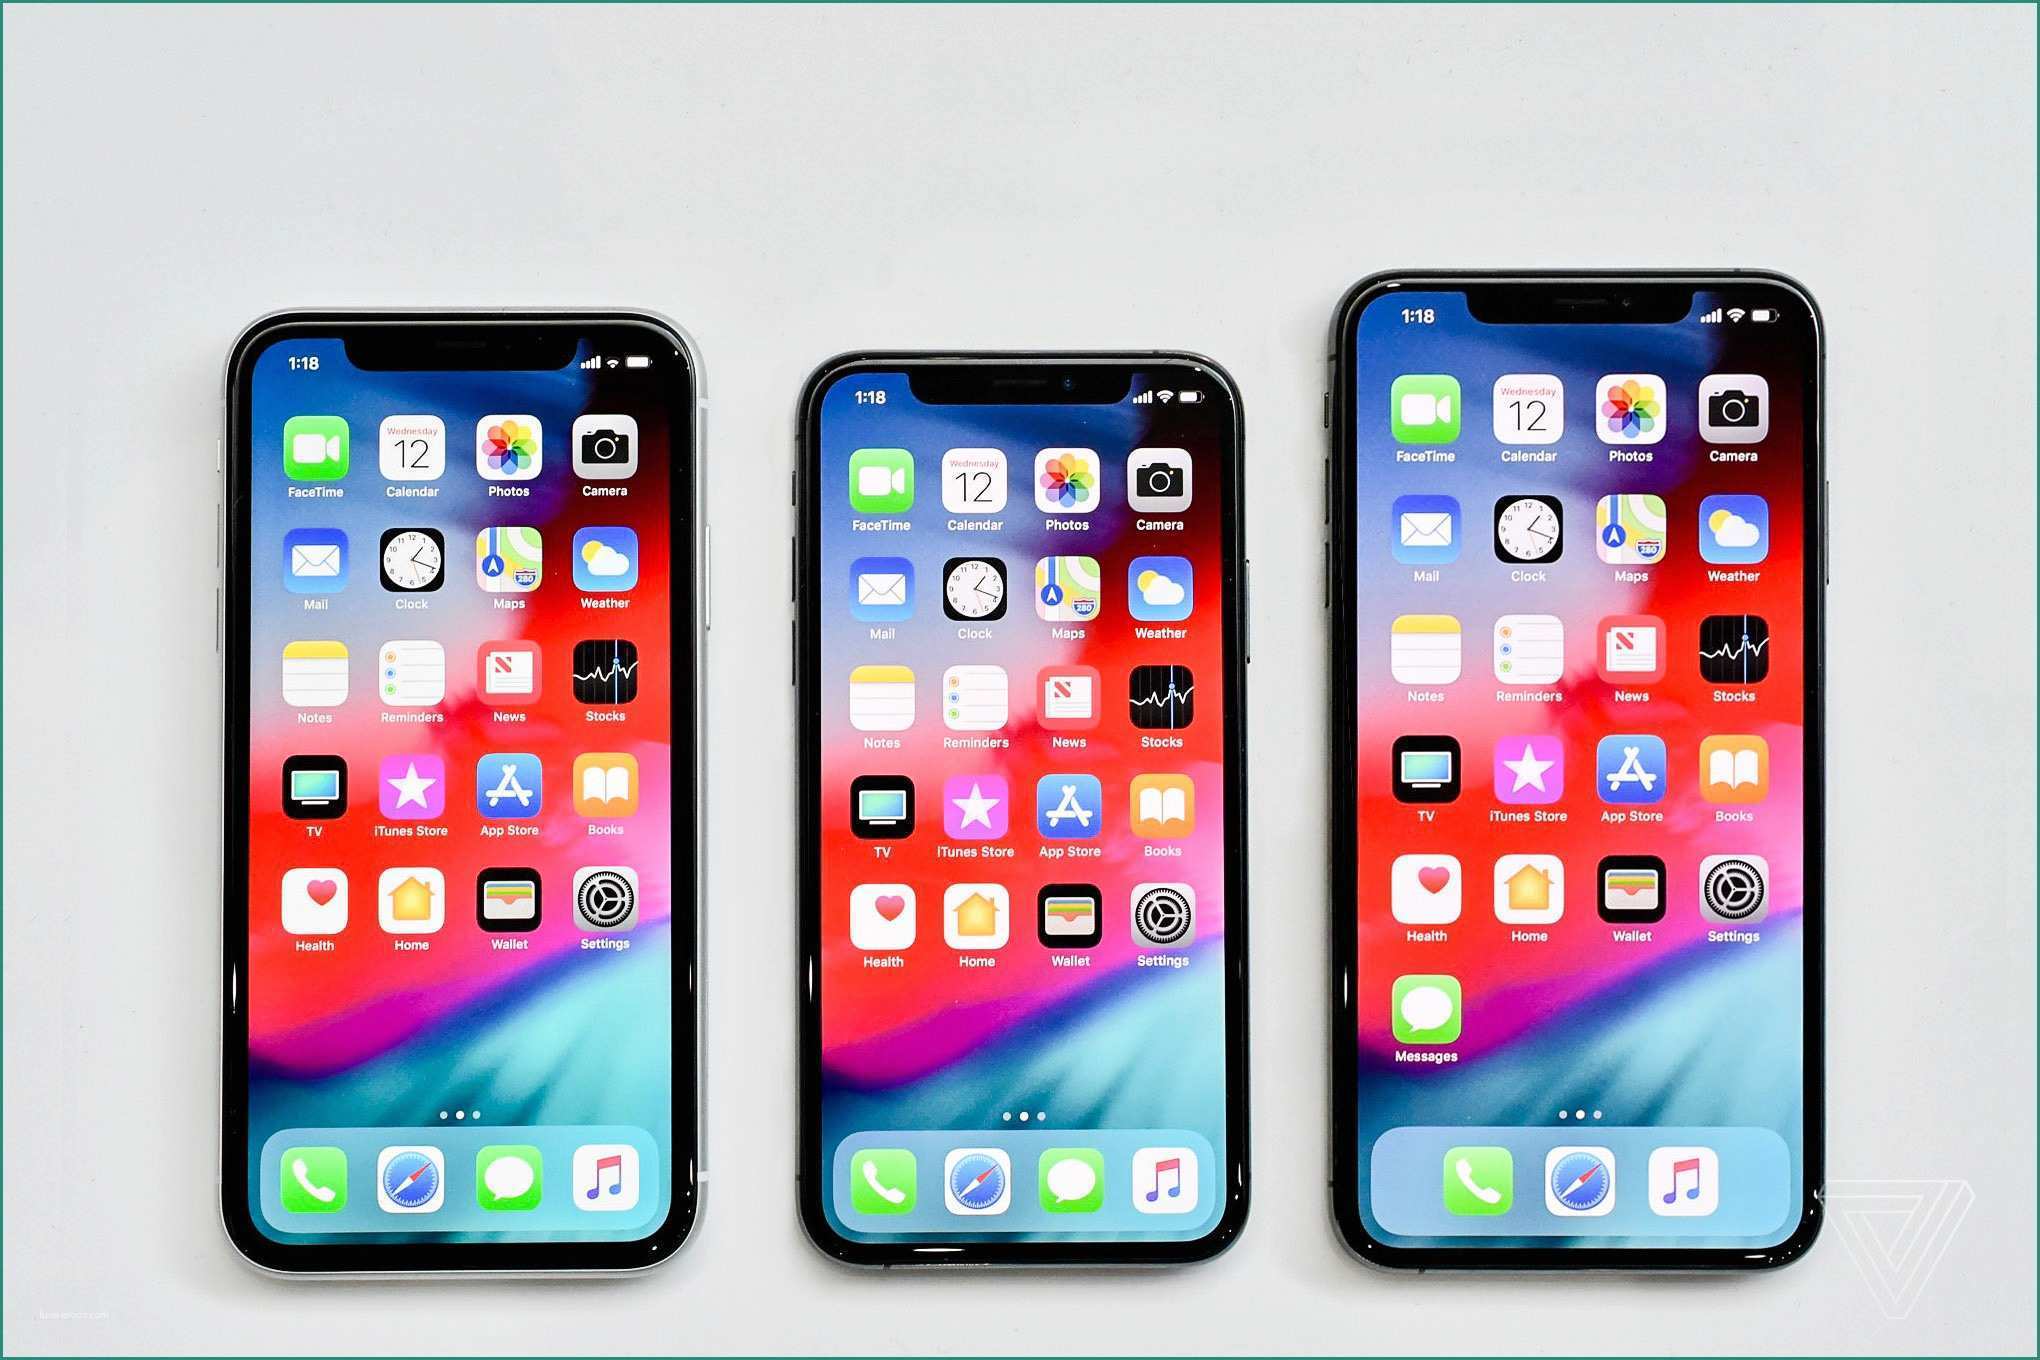 Case Mobili Moderne E iPhone Xs Vs Xs Max Vs Xr How to Pick Between Apple S Three New